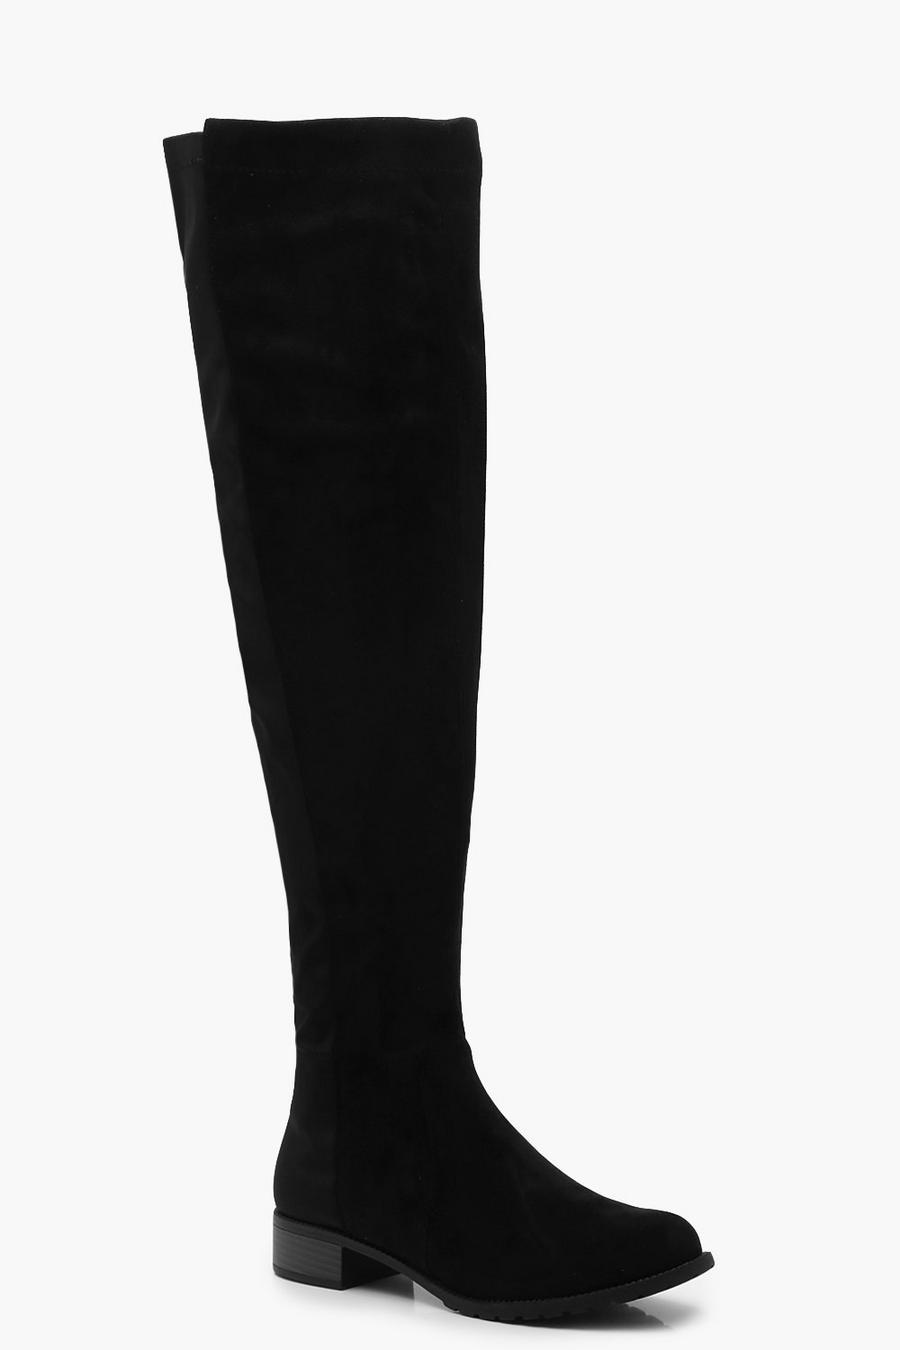 Black Wider Calf Flat Knee High Boots image number 1